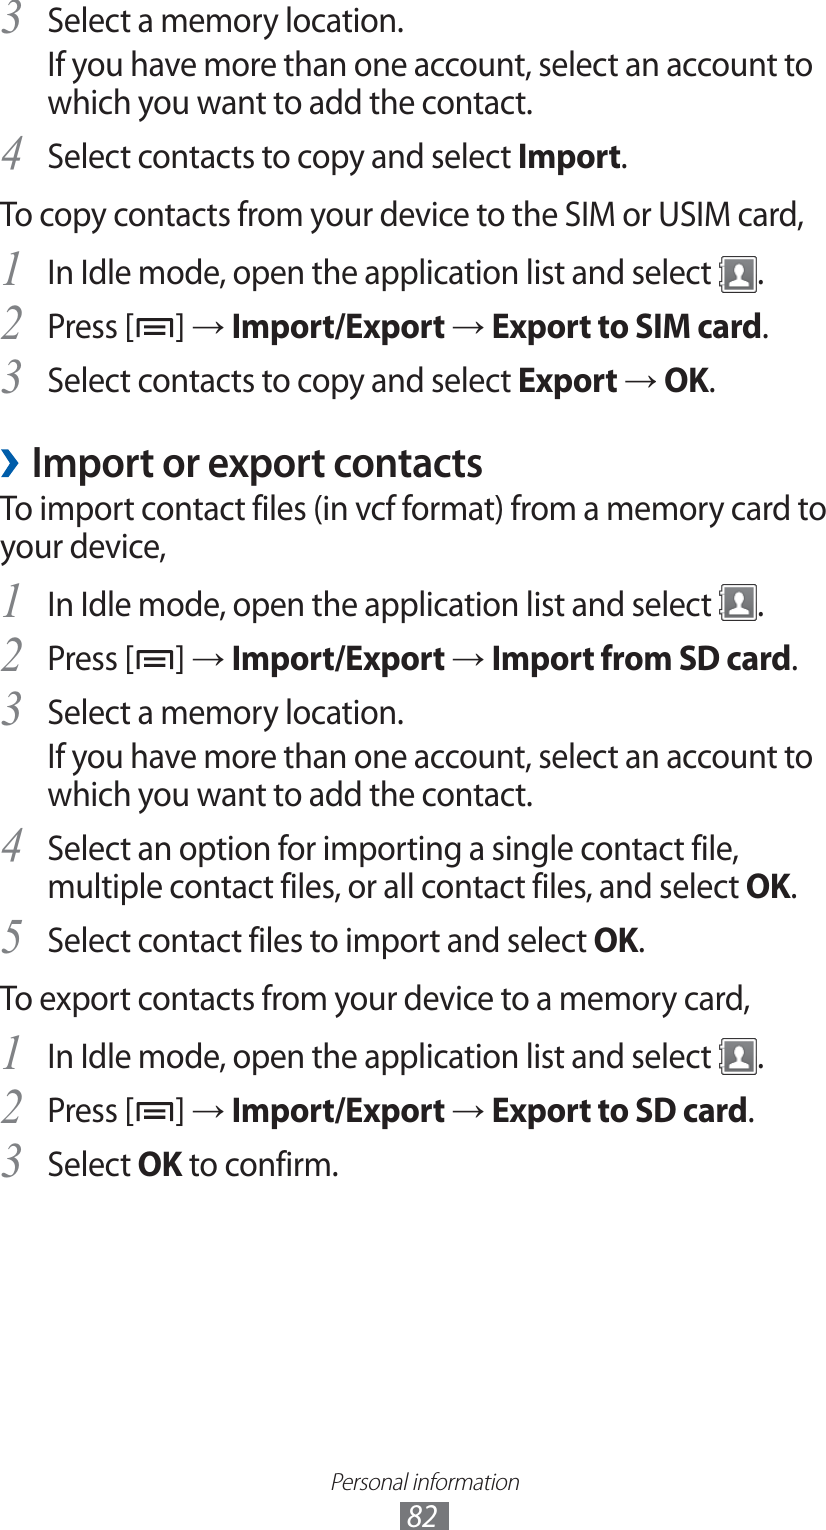 Personal information82Select a memory location.3 If you have more than one account, select an account to which you want to add the contact.Select contacts to copy and select 4 Import.To copy contacts from your device to the SIM or USIM card,In Idle mode, open the application list and select 1 .Press [2 ] → Import/Export → Export to SIM card.Select contacts to copy and select 3 Export → OK.Import or export contacts ›To import contact files (in vcf format) from a memory card to your device,In Idle mode, open the application list and select 1 .Press [2 ] → Import/Export → Import from SD card.Select a memory location.3 If you have more than one account, select an account to which you want to add the contact.Select an option for importing a single contact file, 4 multiple contact files, or all contact files, and select OK.Select contact files to import and select 5 OK.To export contacts from your device to a memory card,In Idle mode, open the application list and select 1 .Press [2 ] → Import/Export → Export to SD card.Select 3 OK to confirm.